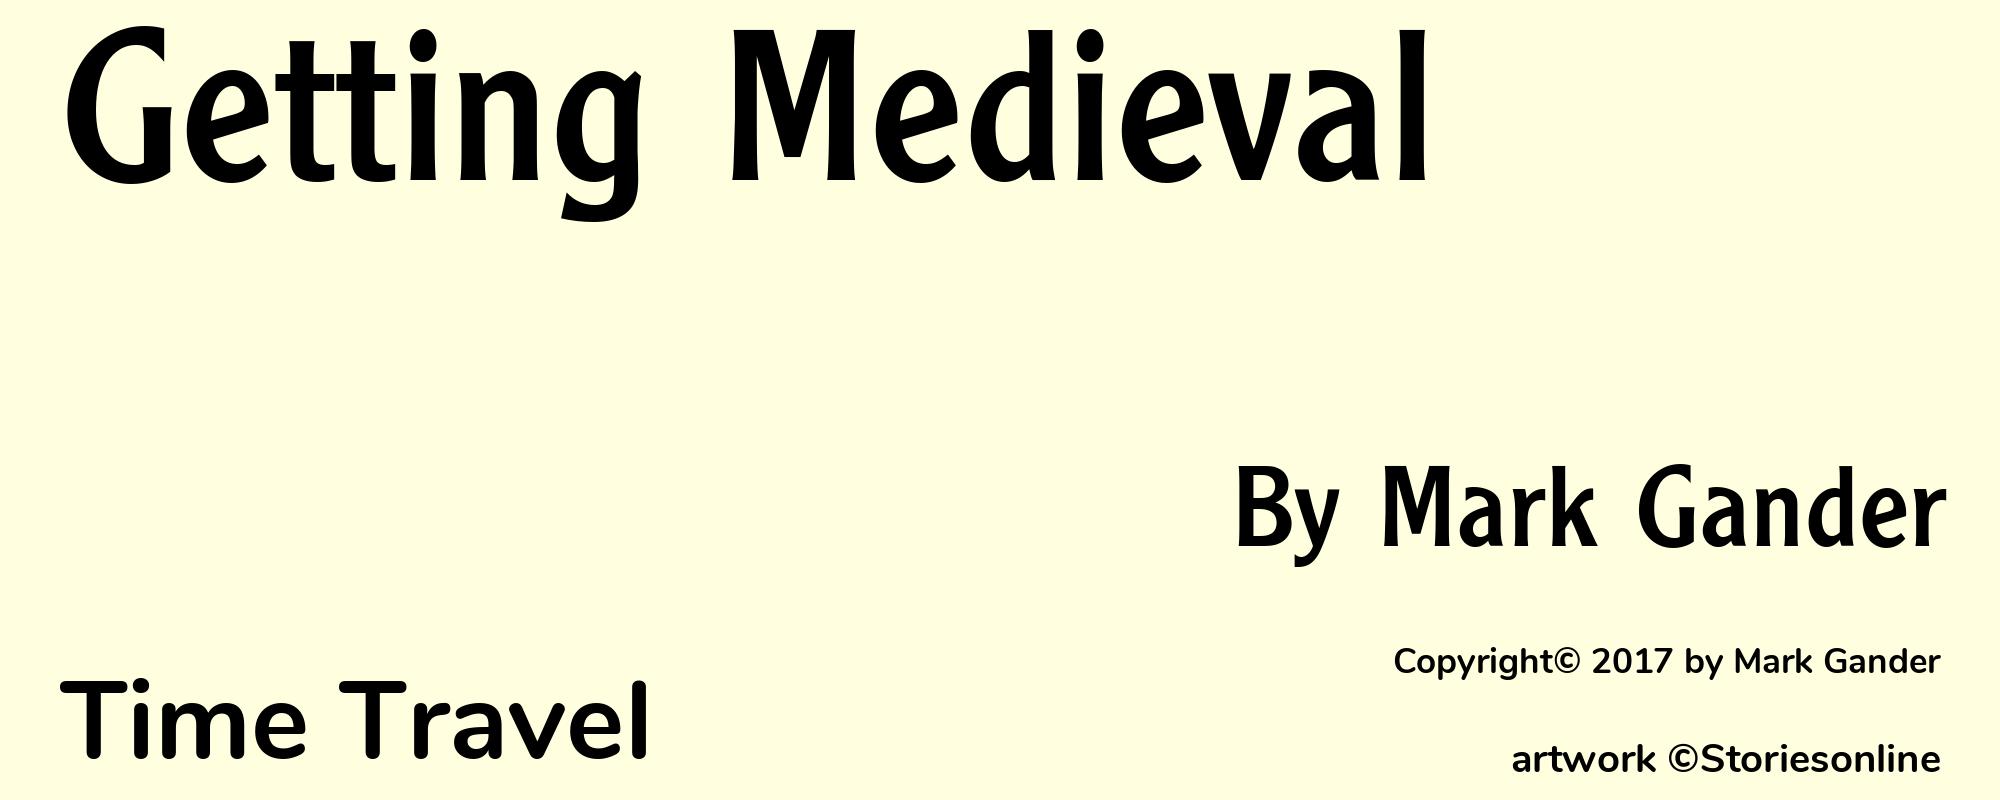 Getting Medieval - Cover